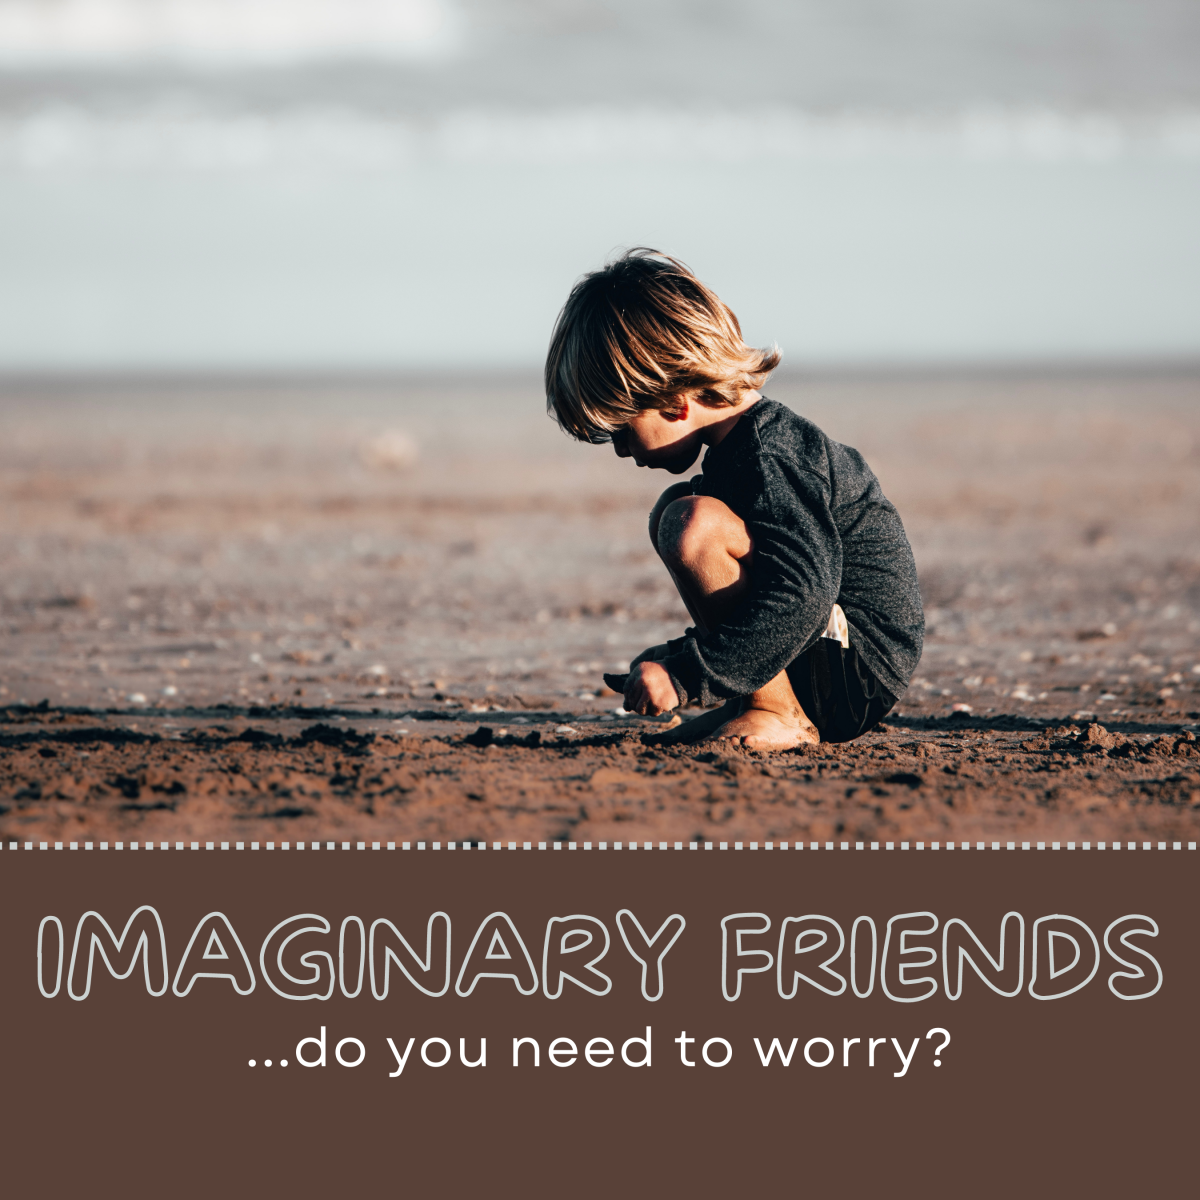 What does it mean if your child has an imaginary friend?